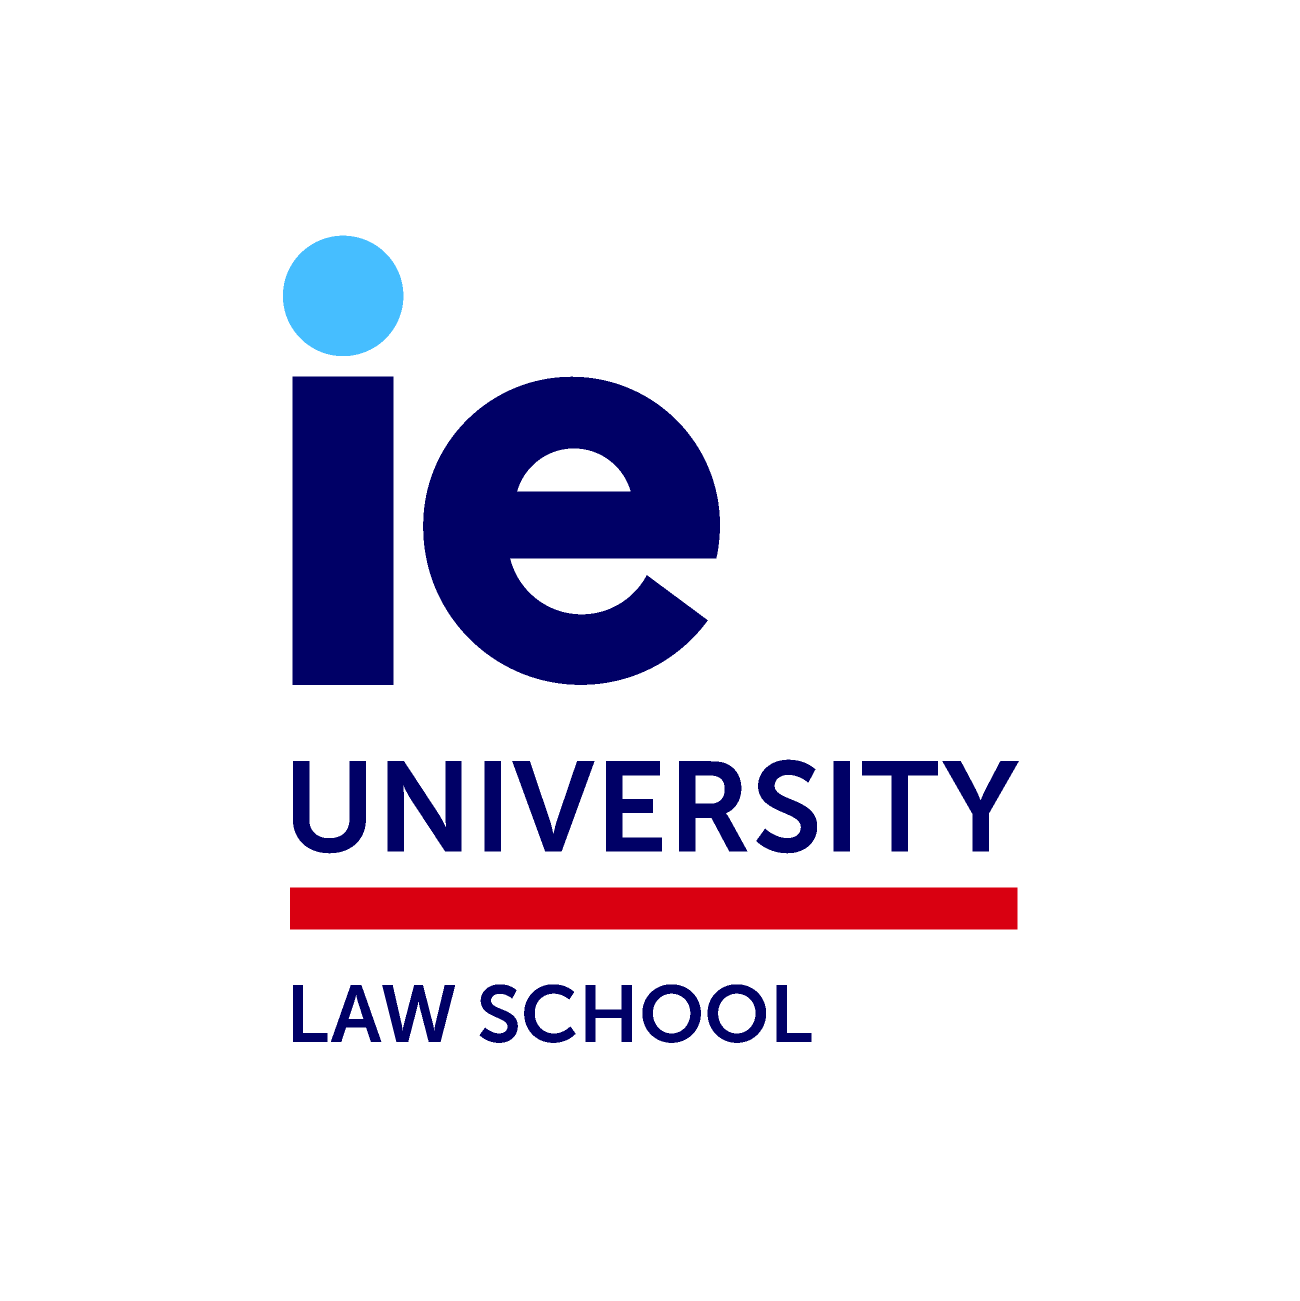 Category=Law School, Subcategory=With University, Style=Blue, Variant=Filled.png